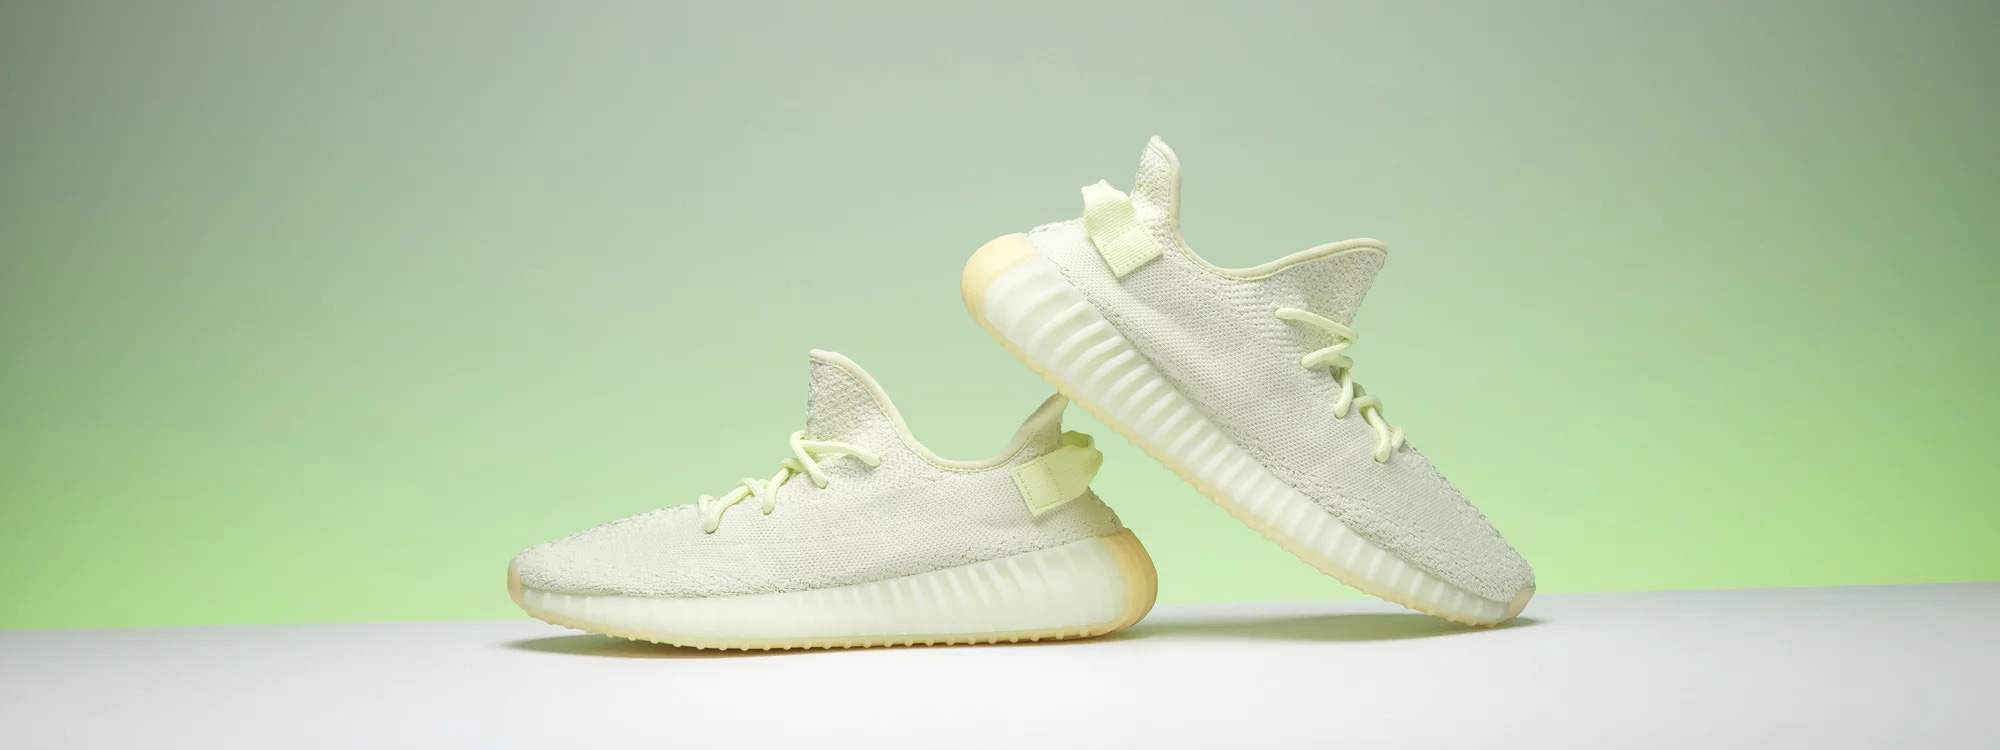 Order Cheap Adidas Yeezy Boost 350 V2 Butter shoes online